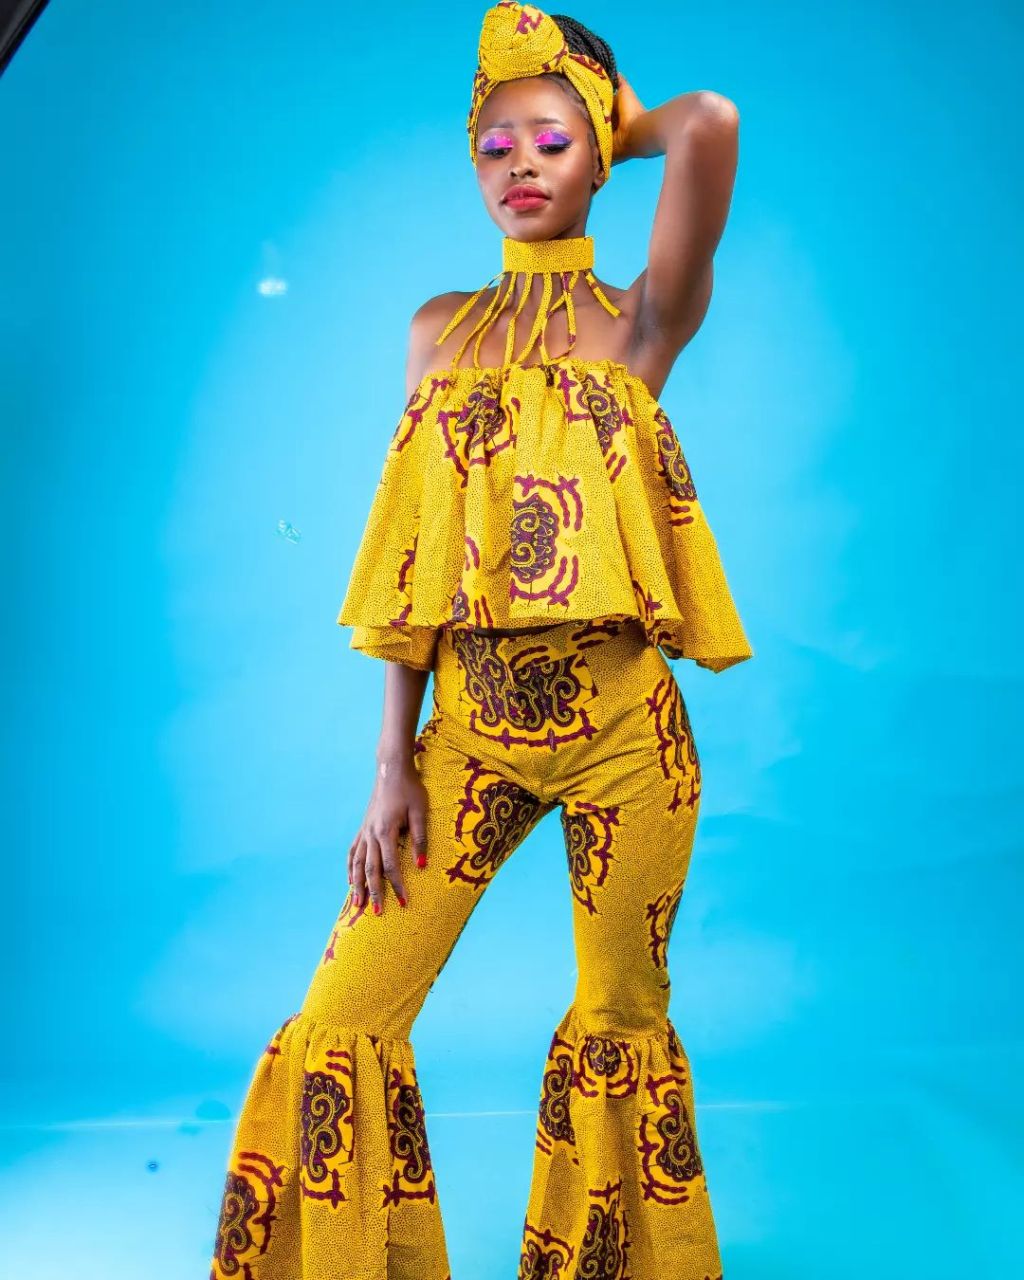 Meet Kenyan fashion model Monique Githui pasionate about style and the runway!